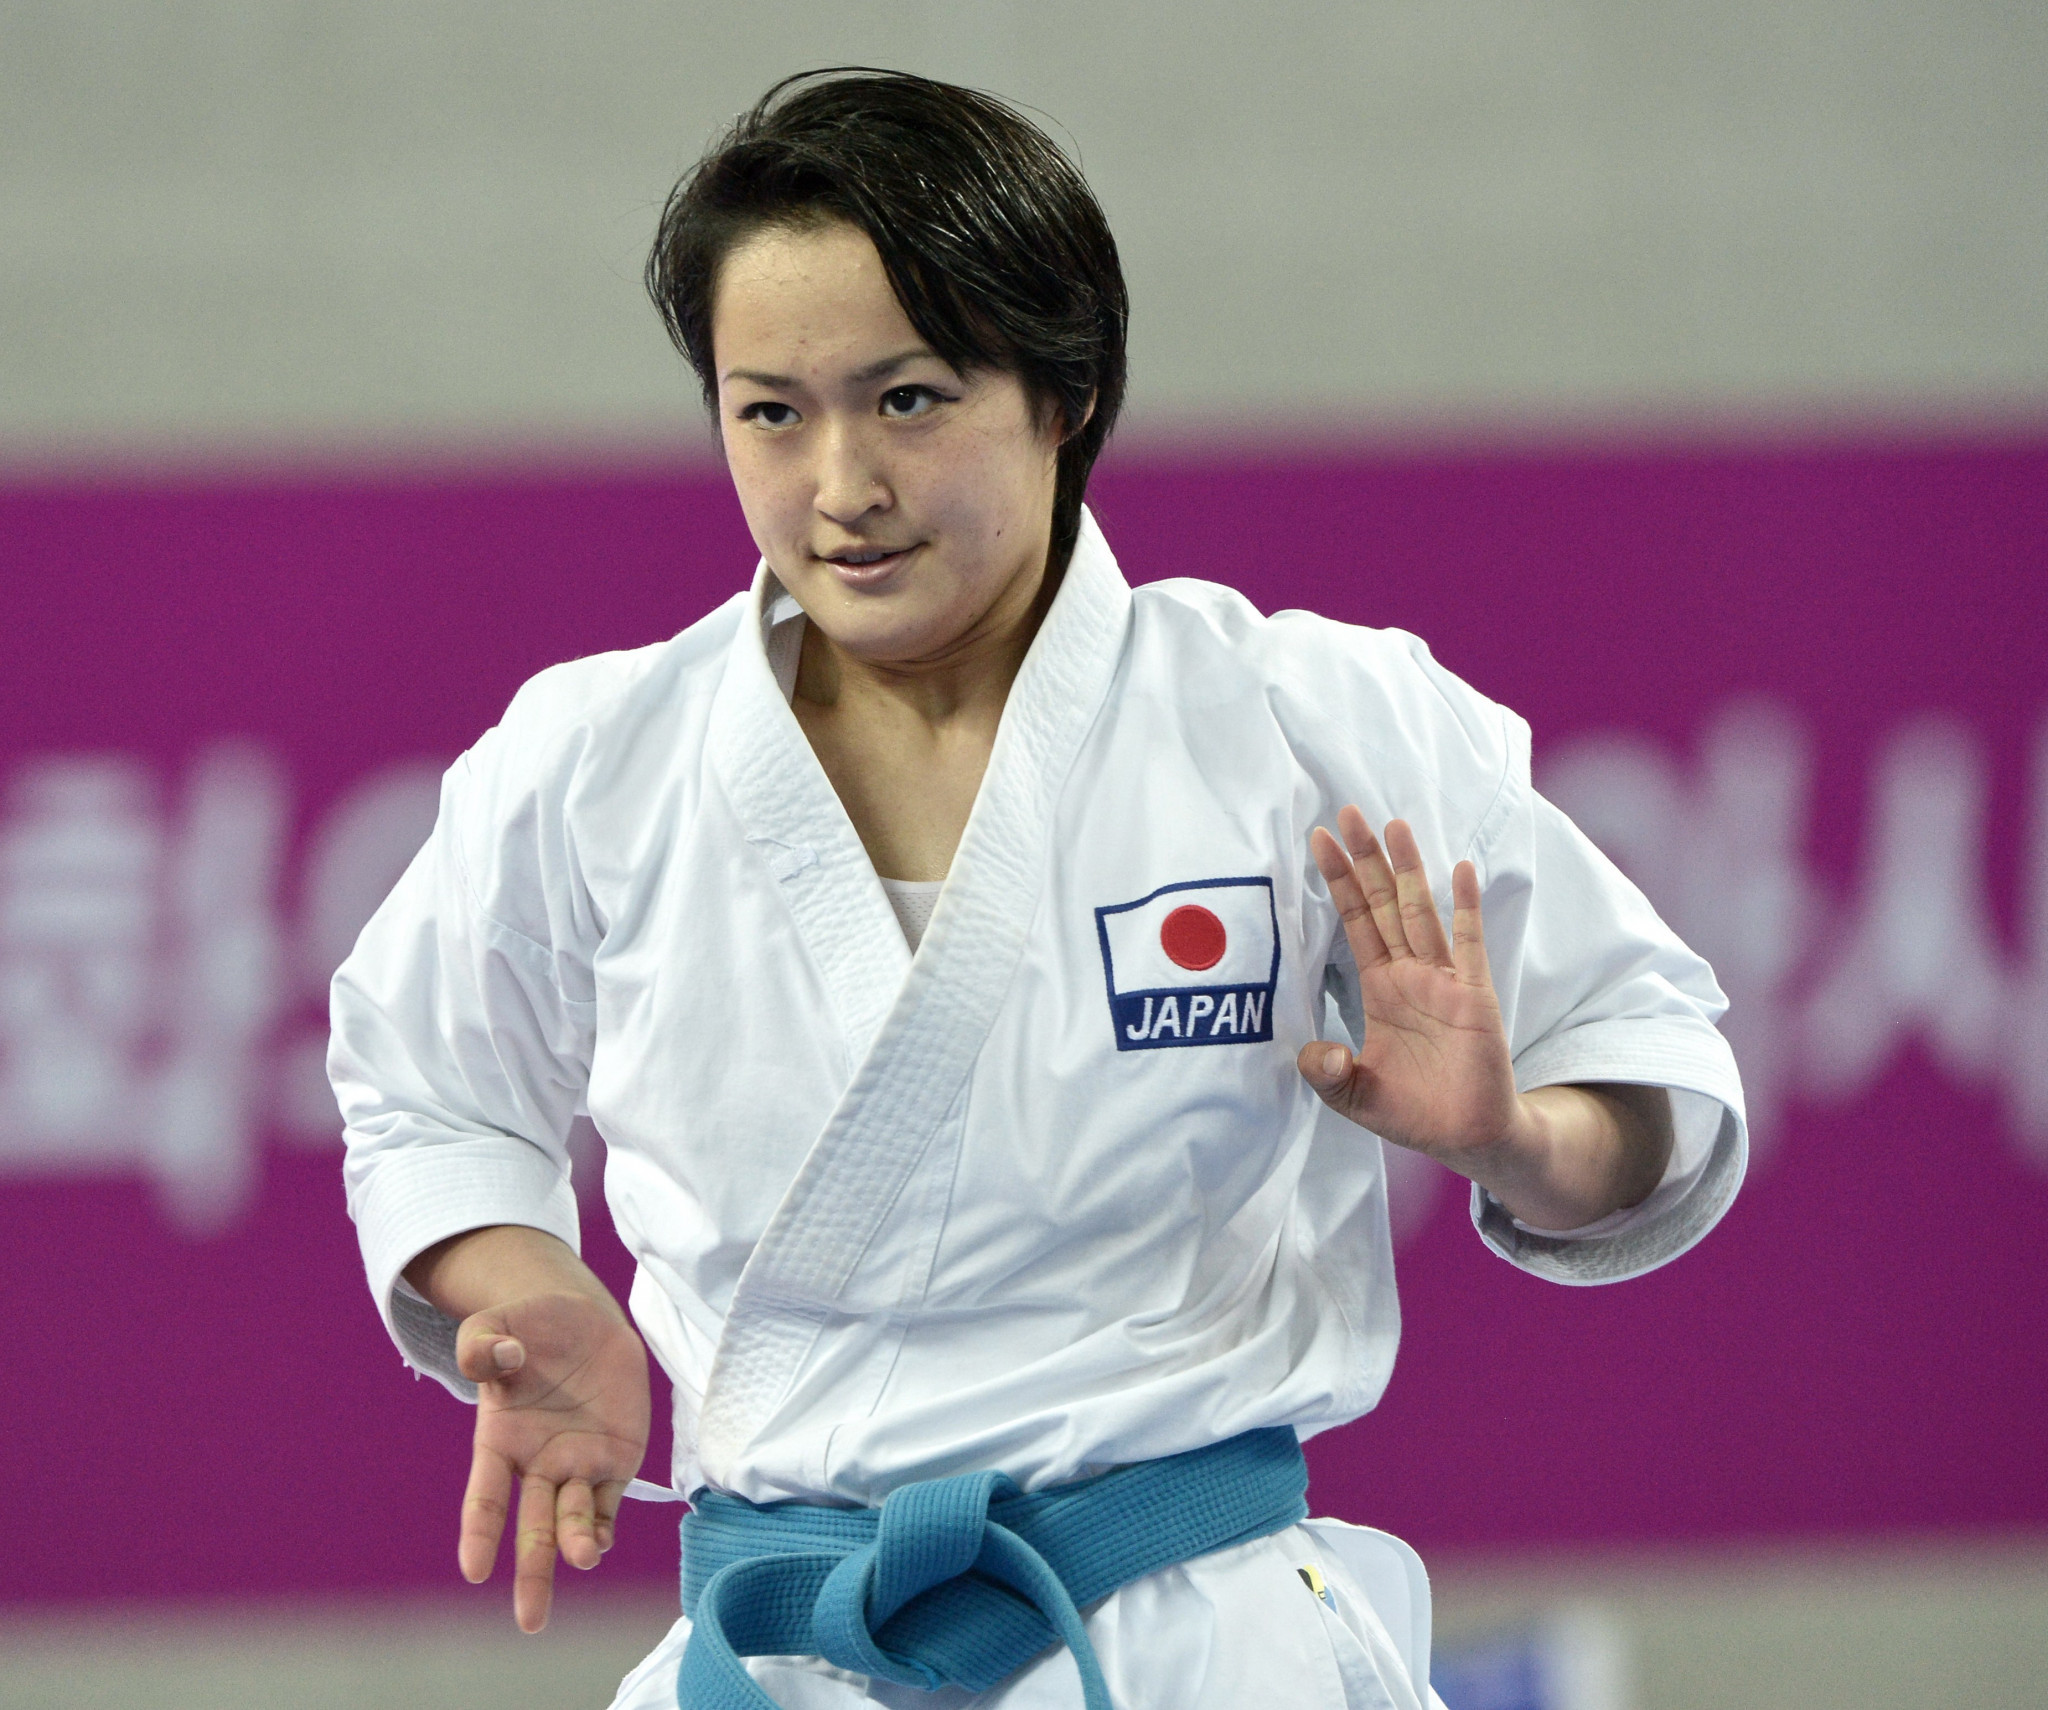 Japan win every kata medal at Karate1 Series A in Istanbul